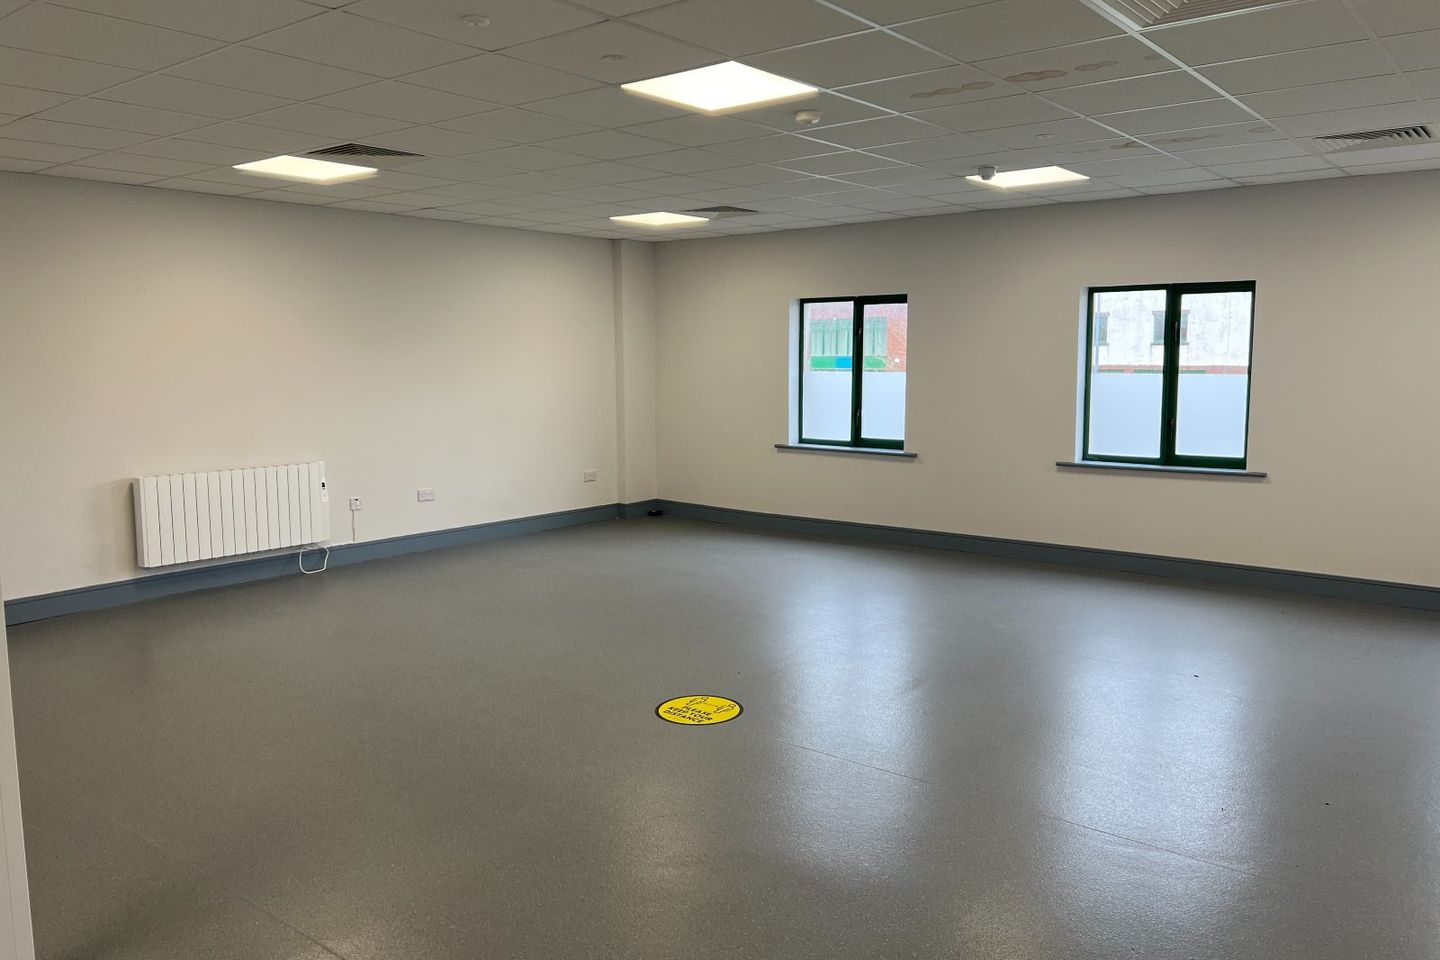 Unit 1, North West Business and Technology Park, Carrick-on-Shannon, Co. Leitrim